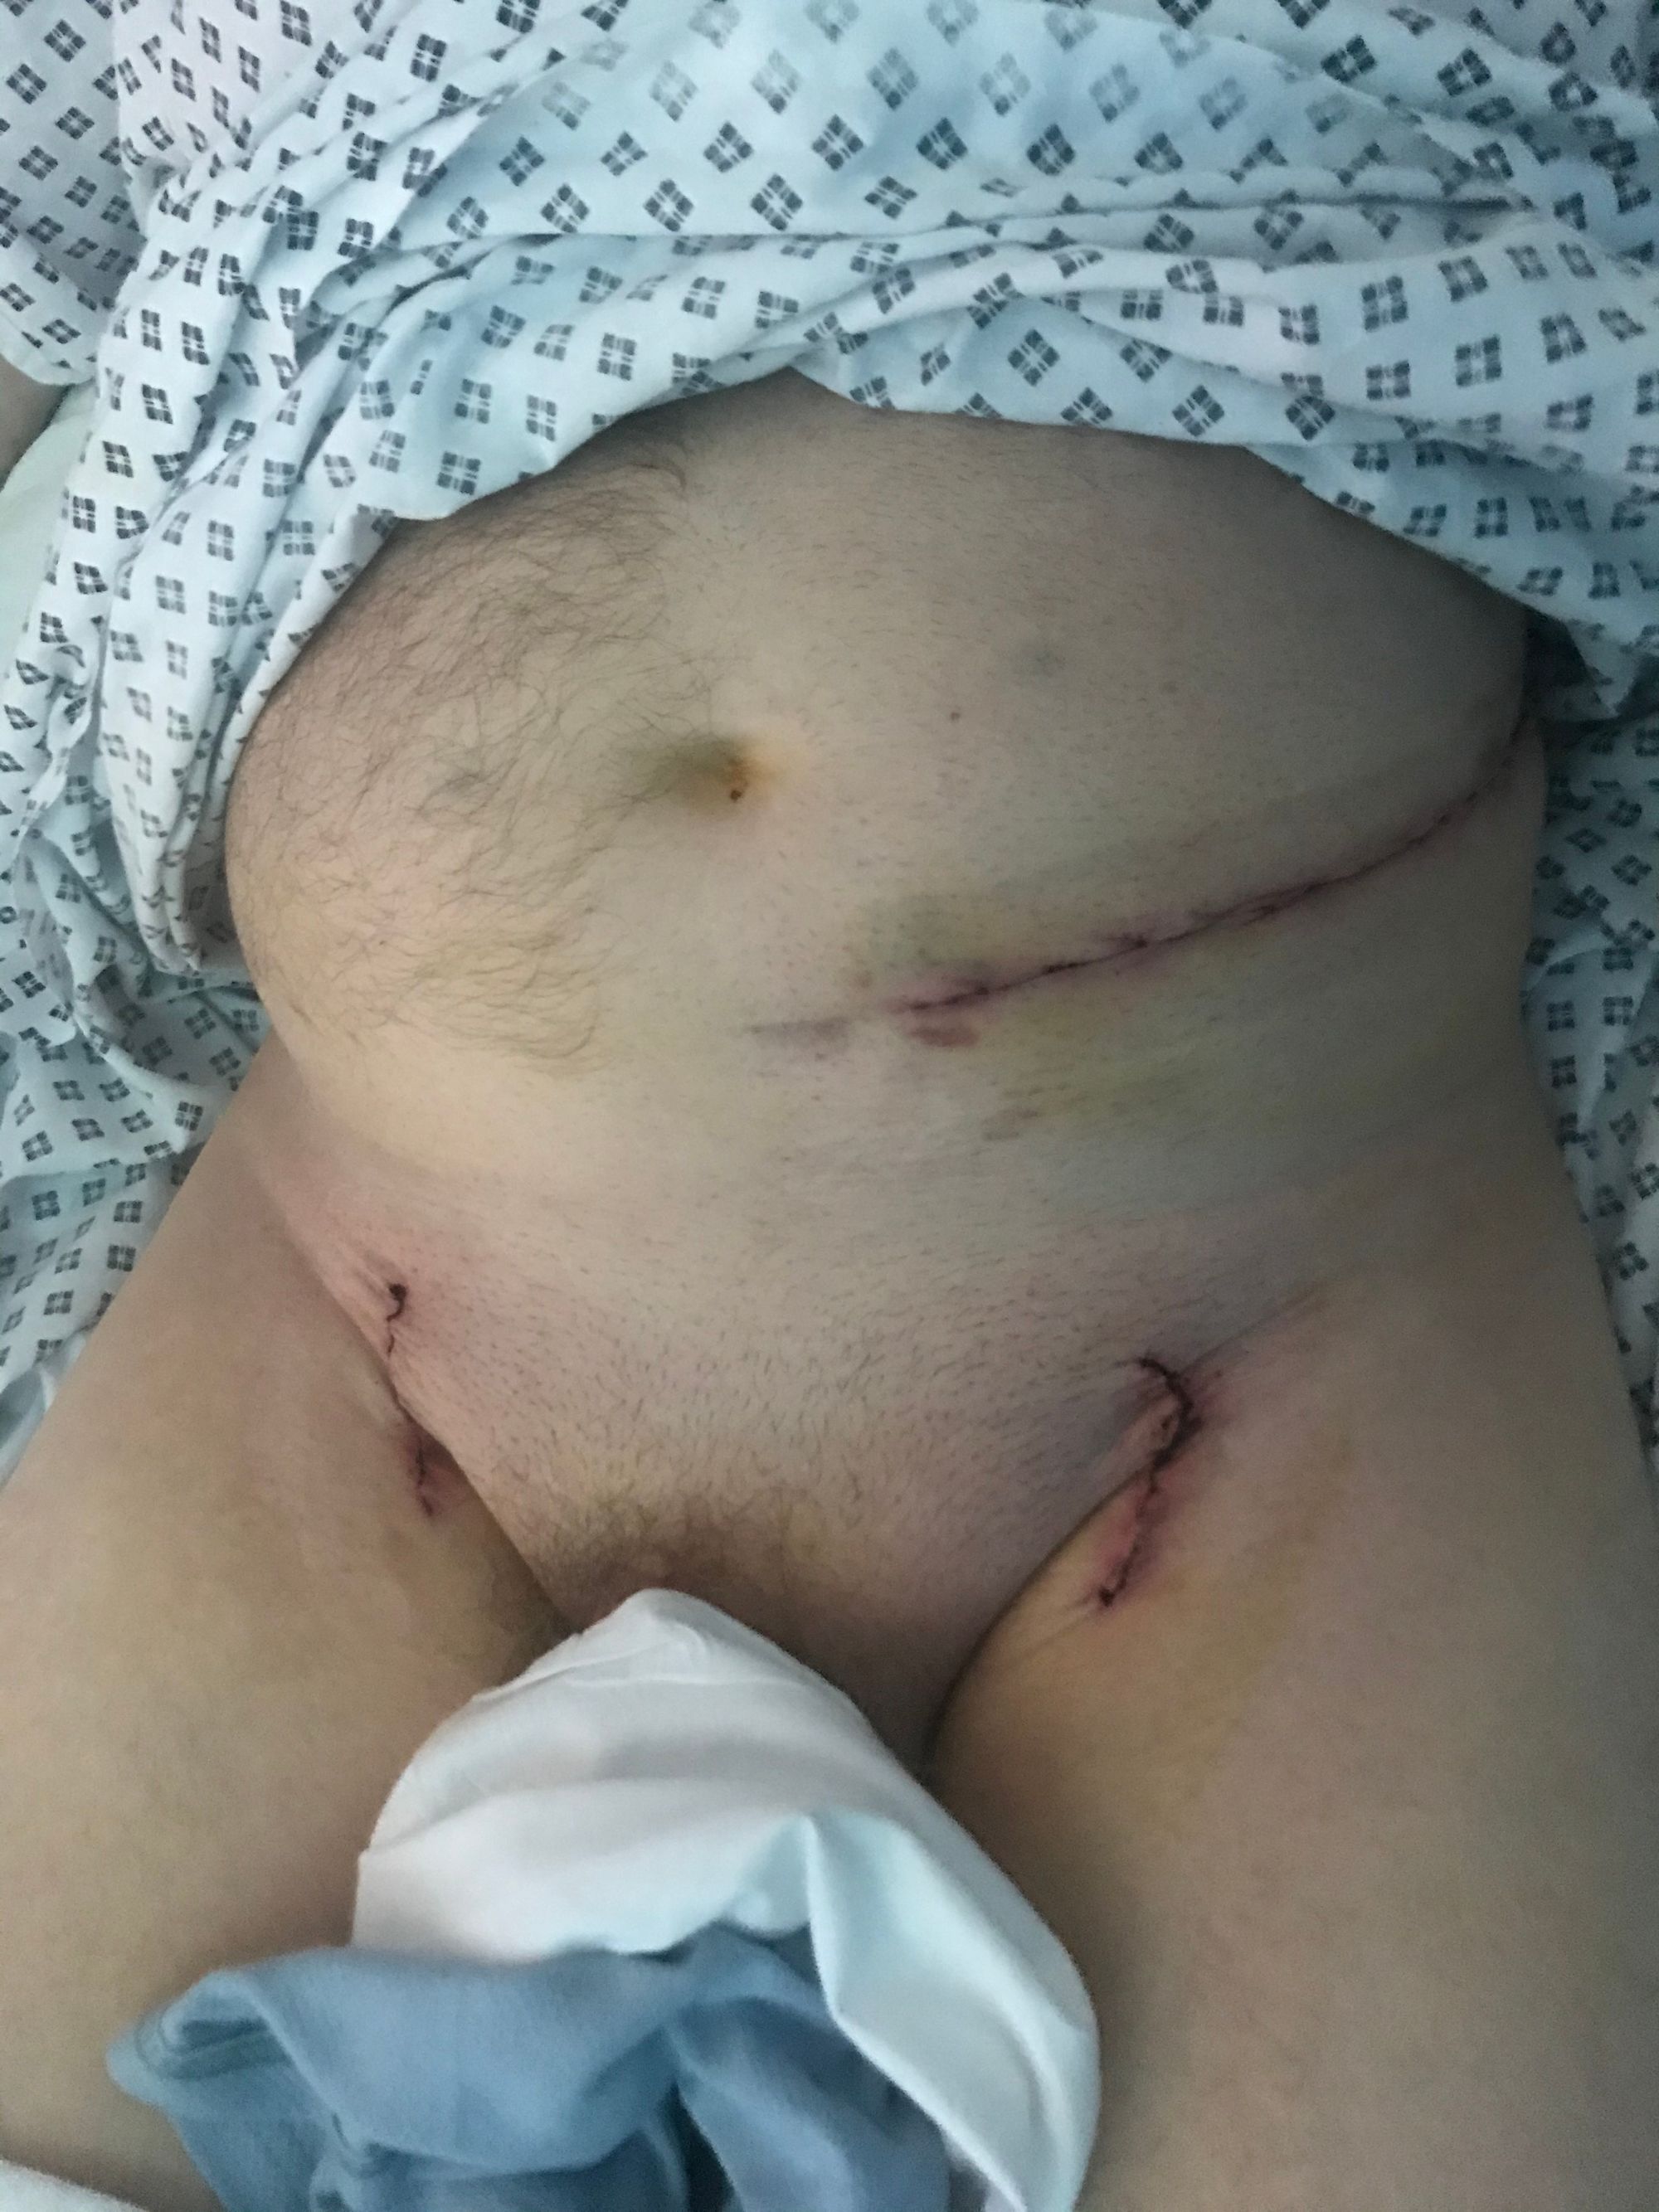 Lower Limb Salvage, successful Aorta bifemoral bypass via left retroperitoneal approach combined with regional anaesthesia.